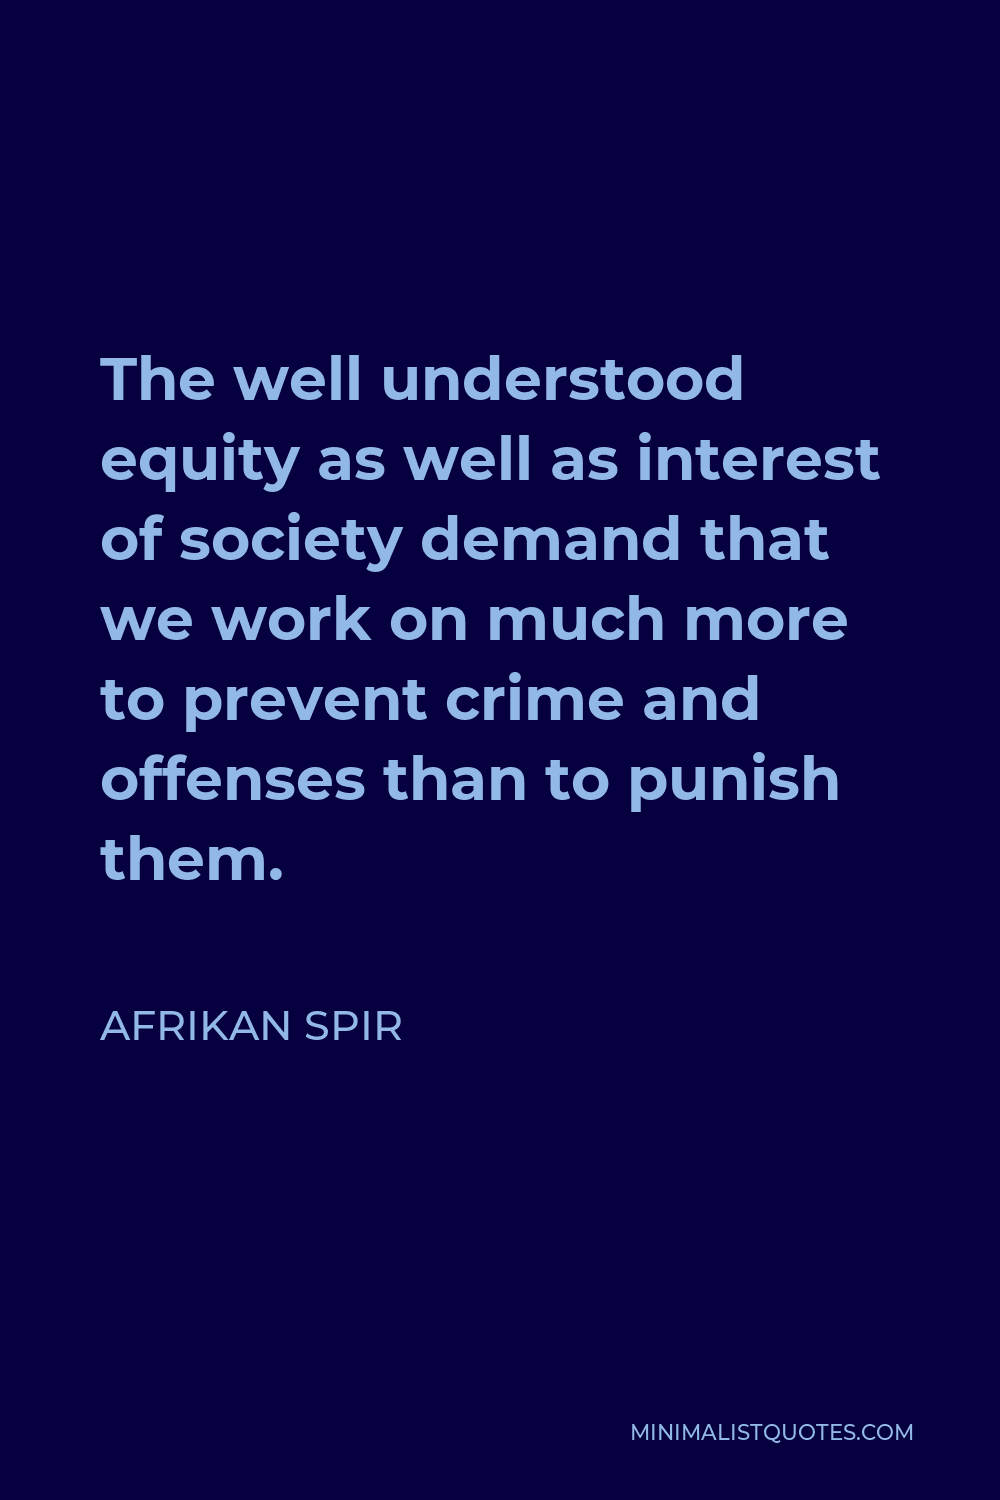 Afrikan Spir Quote - The well understood equity as well as interest of society demand that we work on much more to prevent crime and offenses than to punish them.